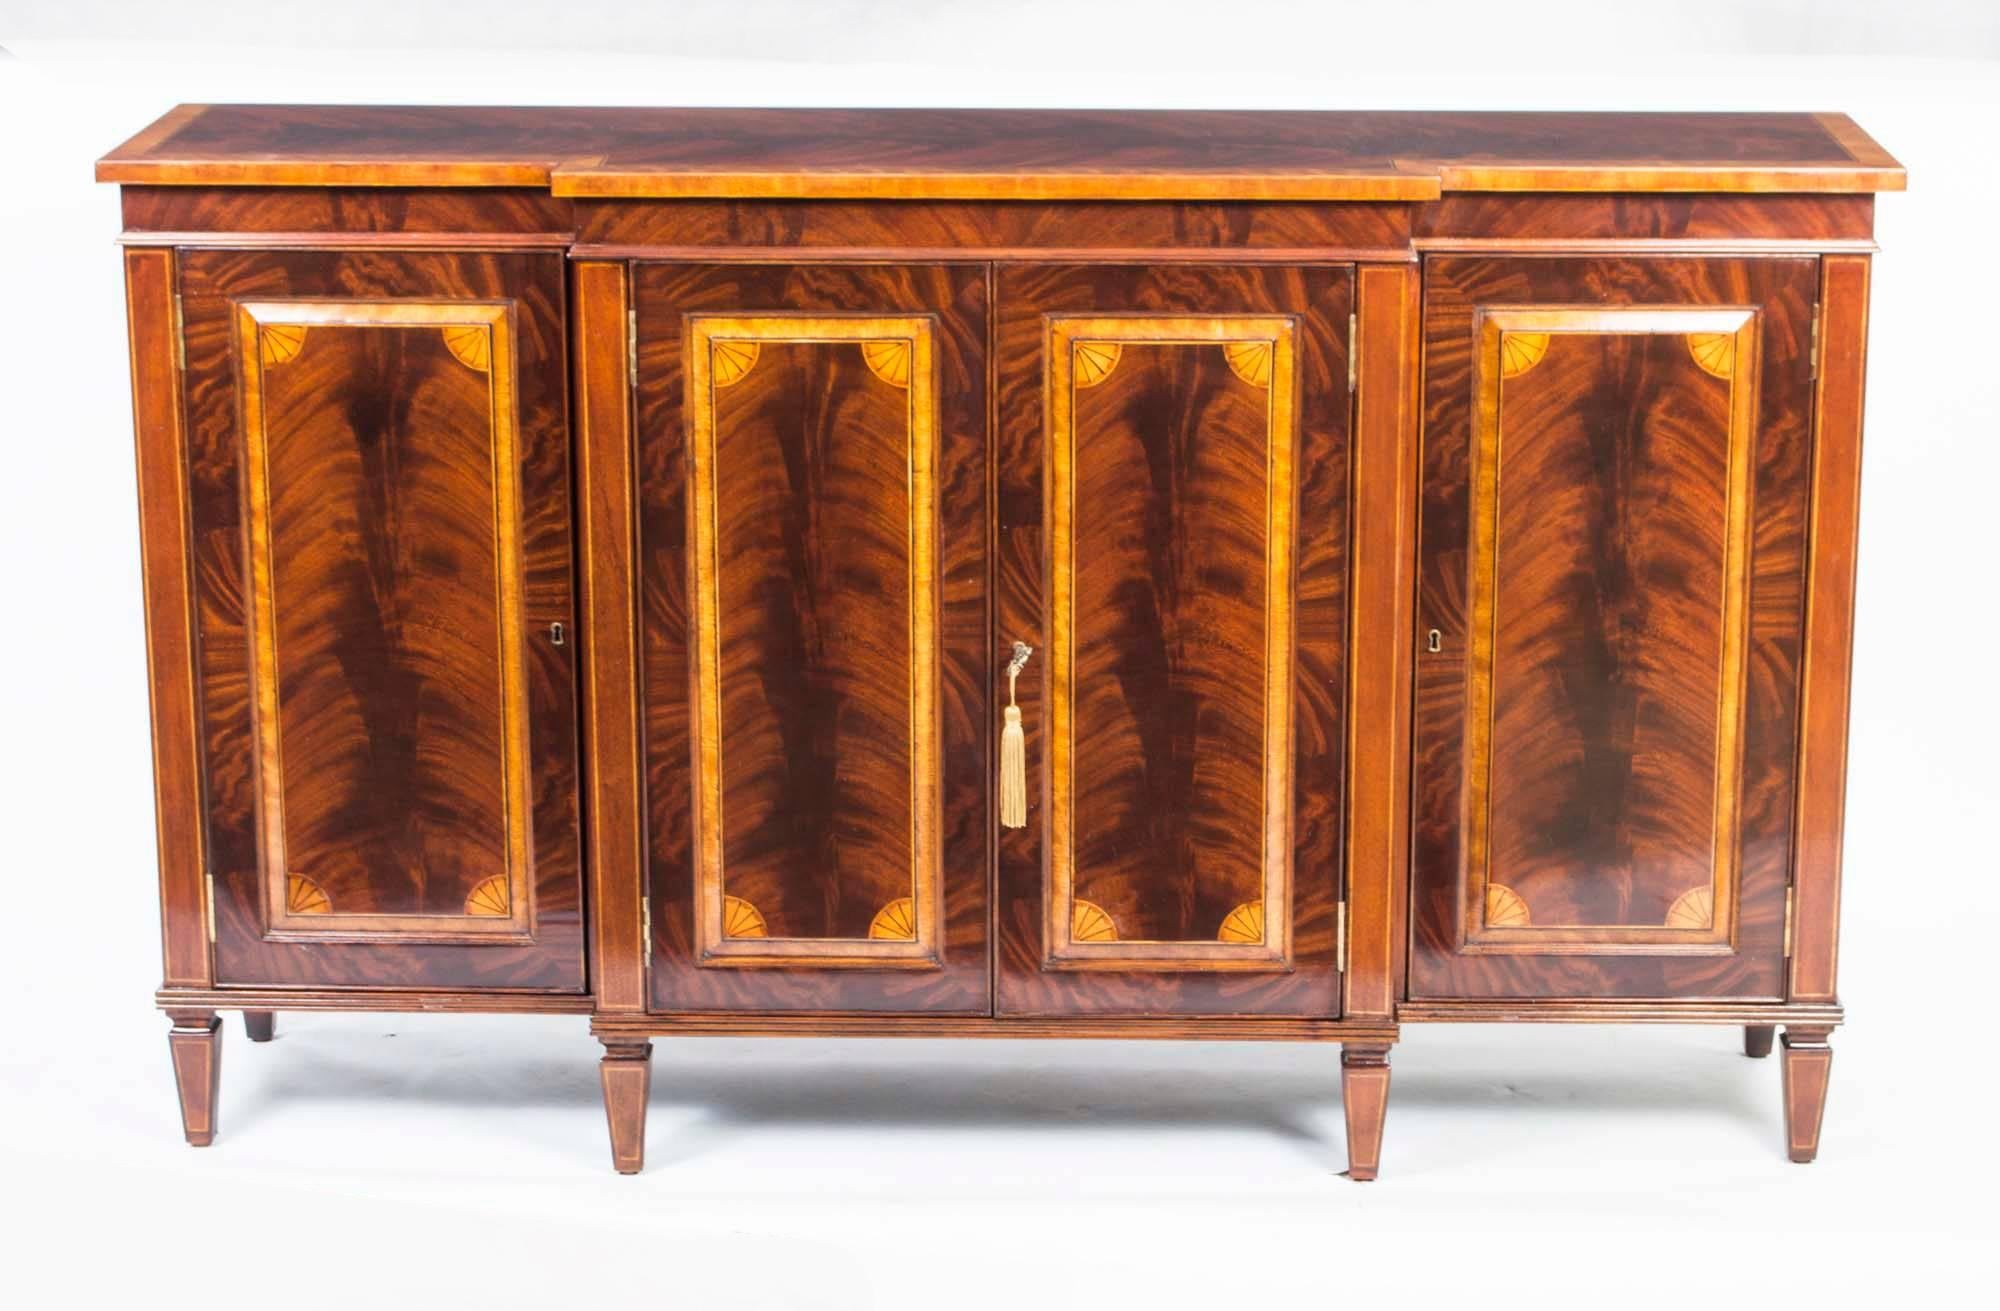 This is a beautiful breakfront flame mahogany sideboard with room for all your plates, china, glassware and cutlery, dating from the last quarter of the 20th century.

It has four doors and fabulous inlaid satinwood decoration of fans, inlay and